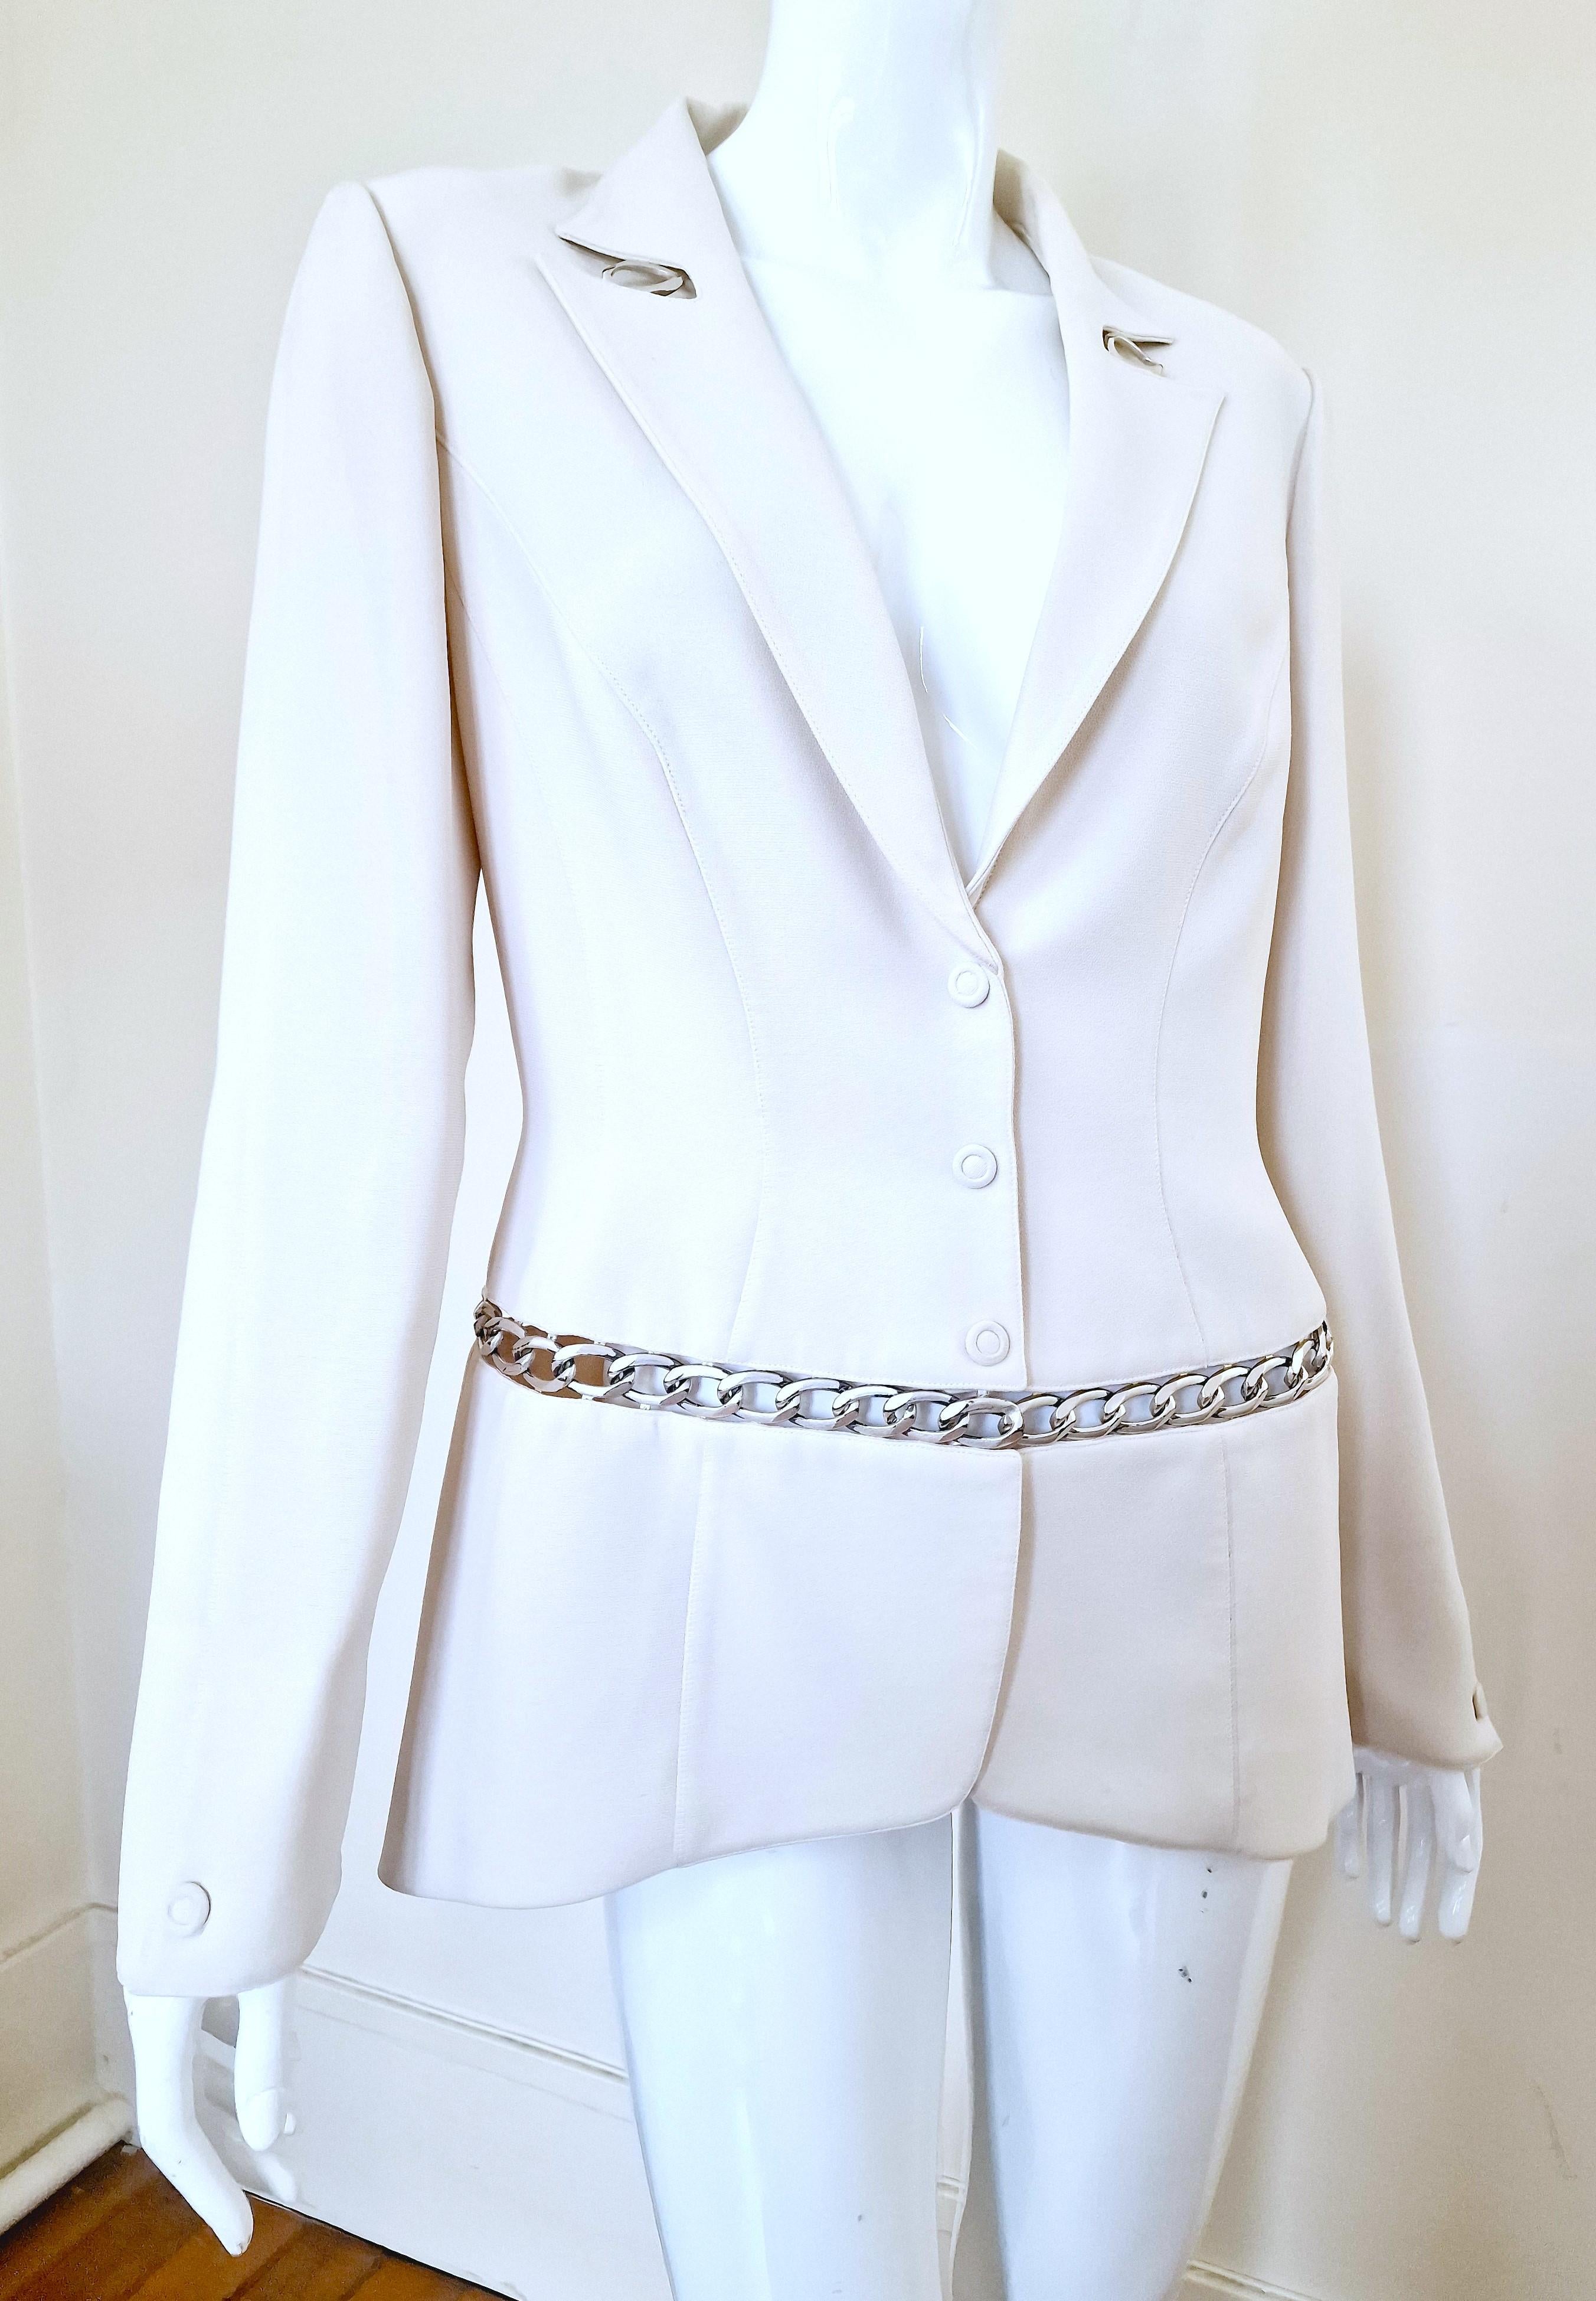 Chain jacket by Thierry Mugler!
The chain runs through the full jacket.
2 metal chains on the collar.
With shouler pads.
Wonderful silhouette.

VERY GOOD condition! The paint of chain is faded at some parts, please check the photos! Still wonderful